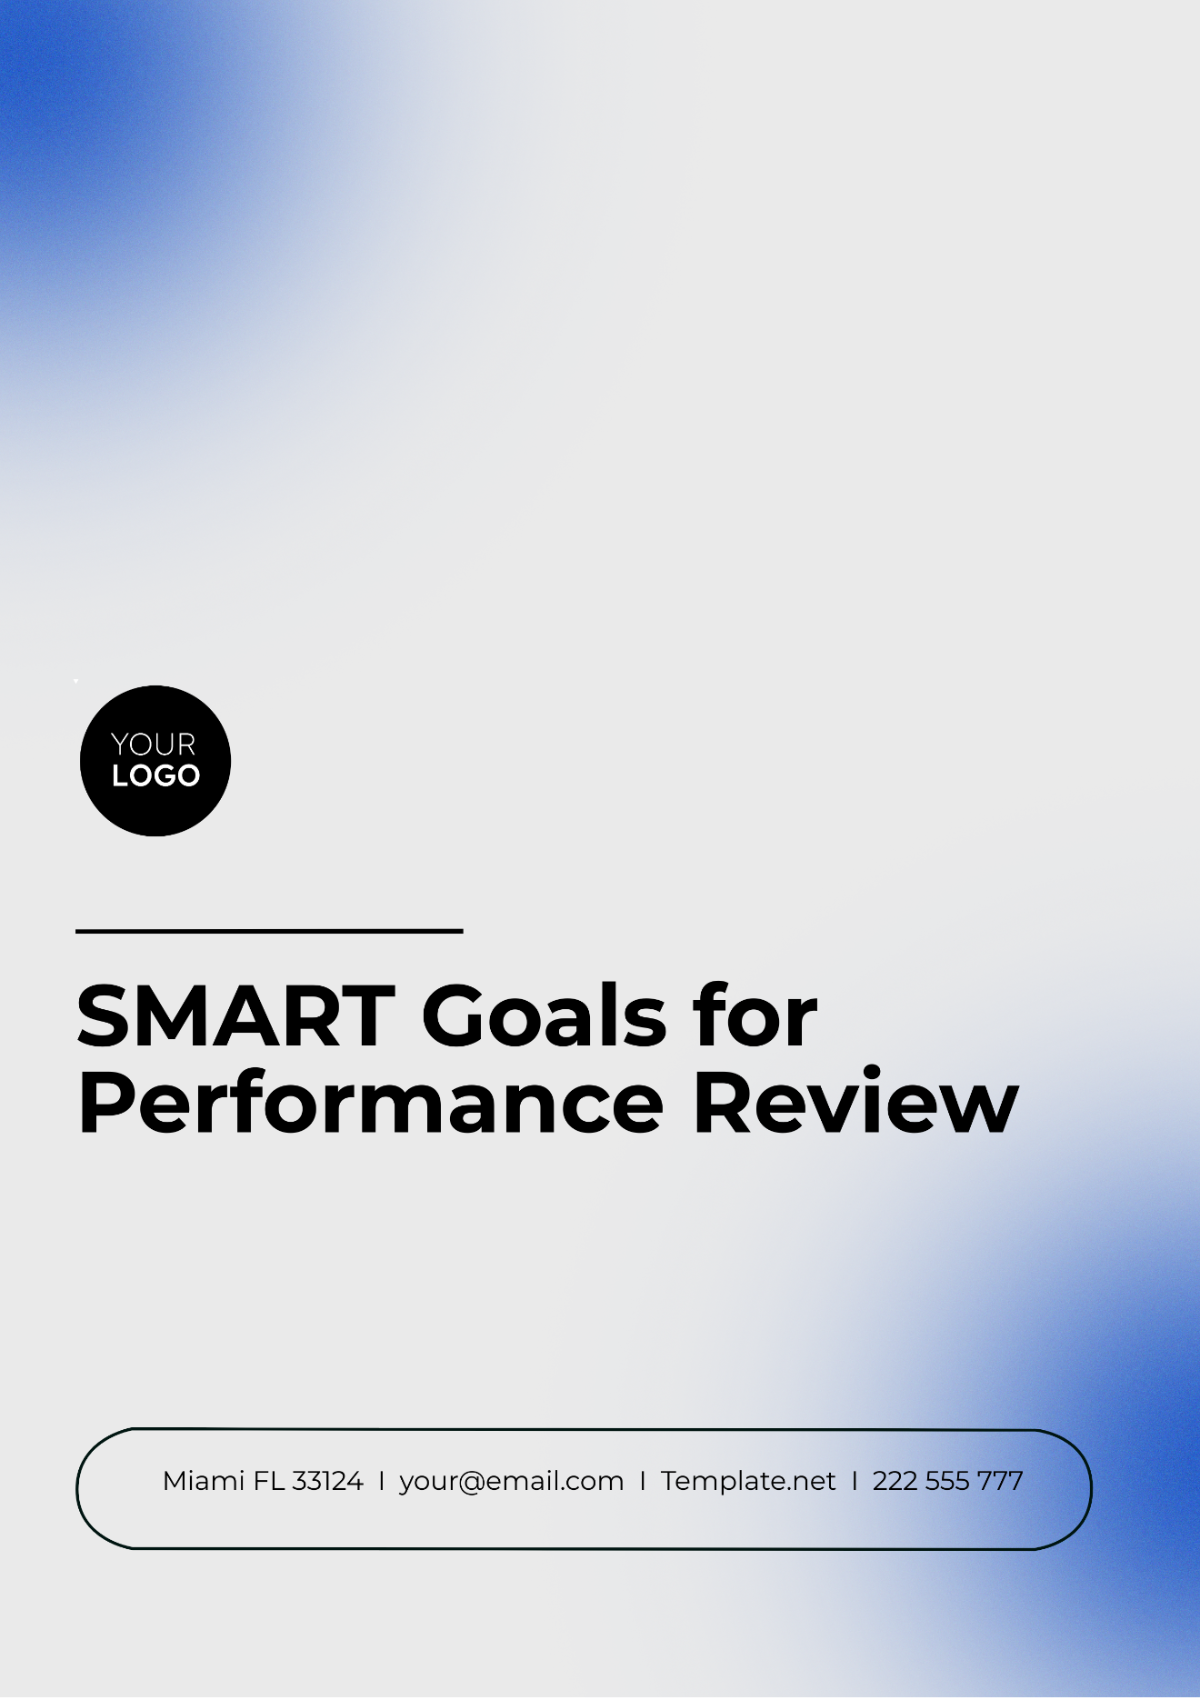 SMART Goals Template for Performance Review